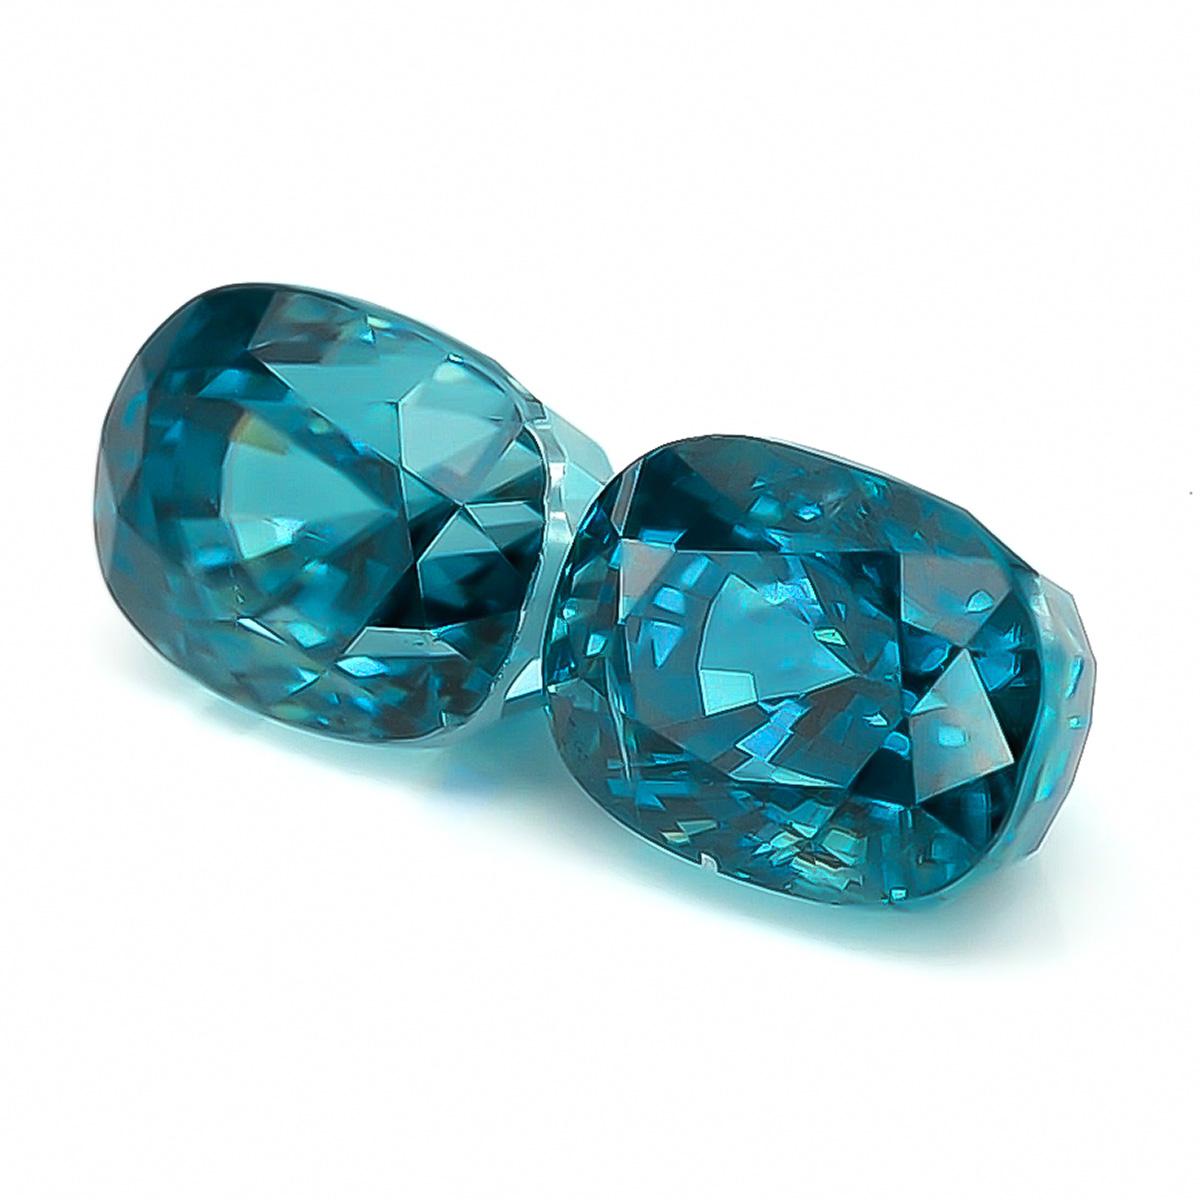 Step into a world of refined elegance with our exceptional Natural Blue Zircon Matching Pair. Totaling 10.20 carats, these gemstones have been meticulously crafted into cushion-shaped wonders, measuring 9.04 x 6.72 x 7.49 mm and 9.04 x 6.69 x 7.16